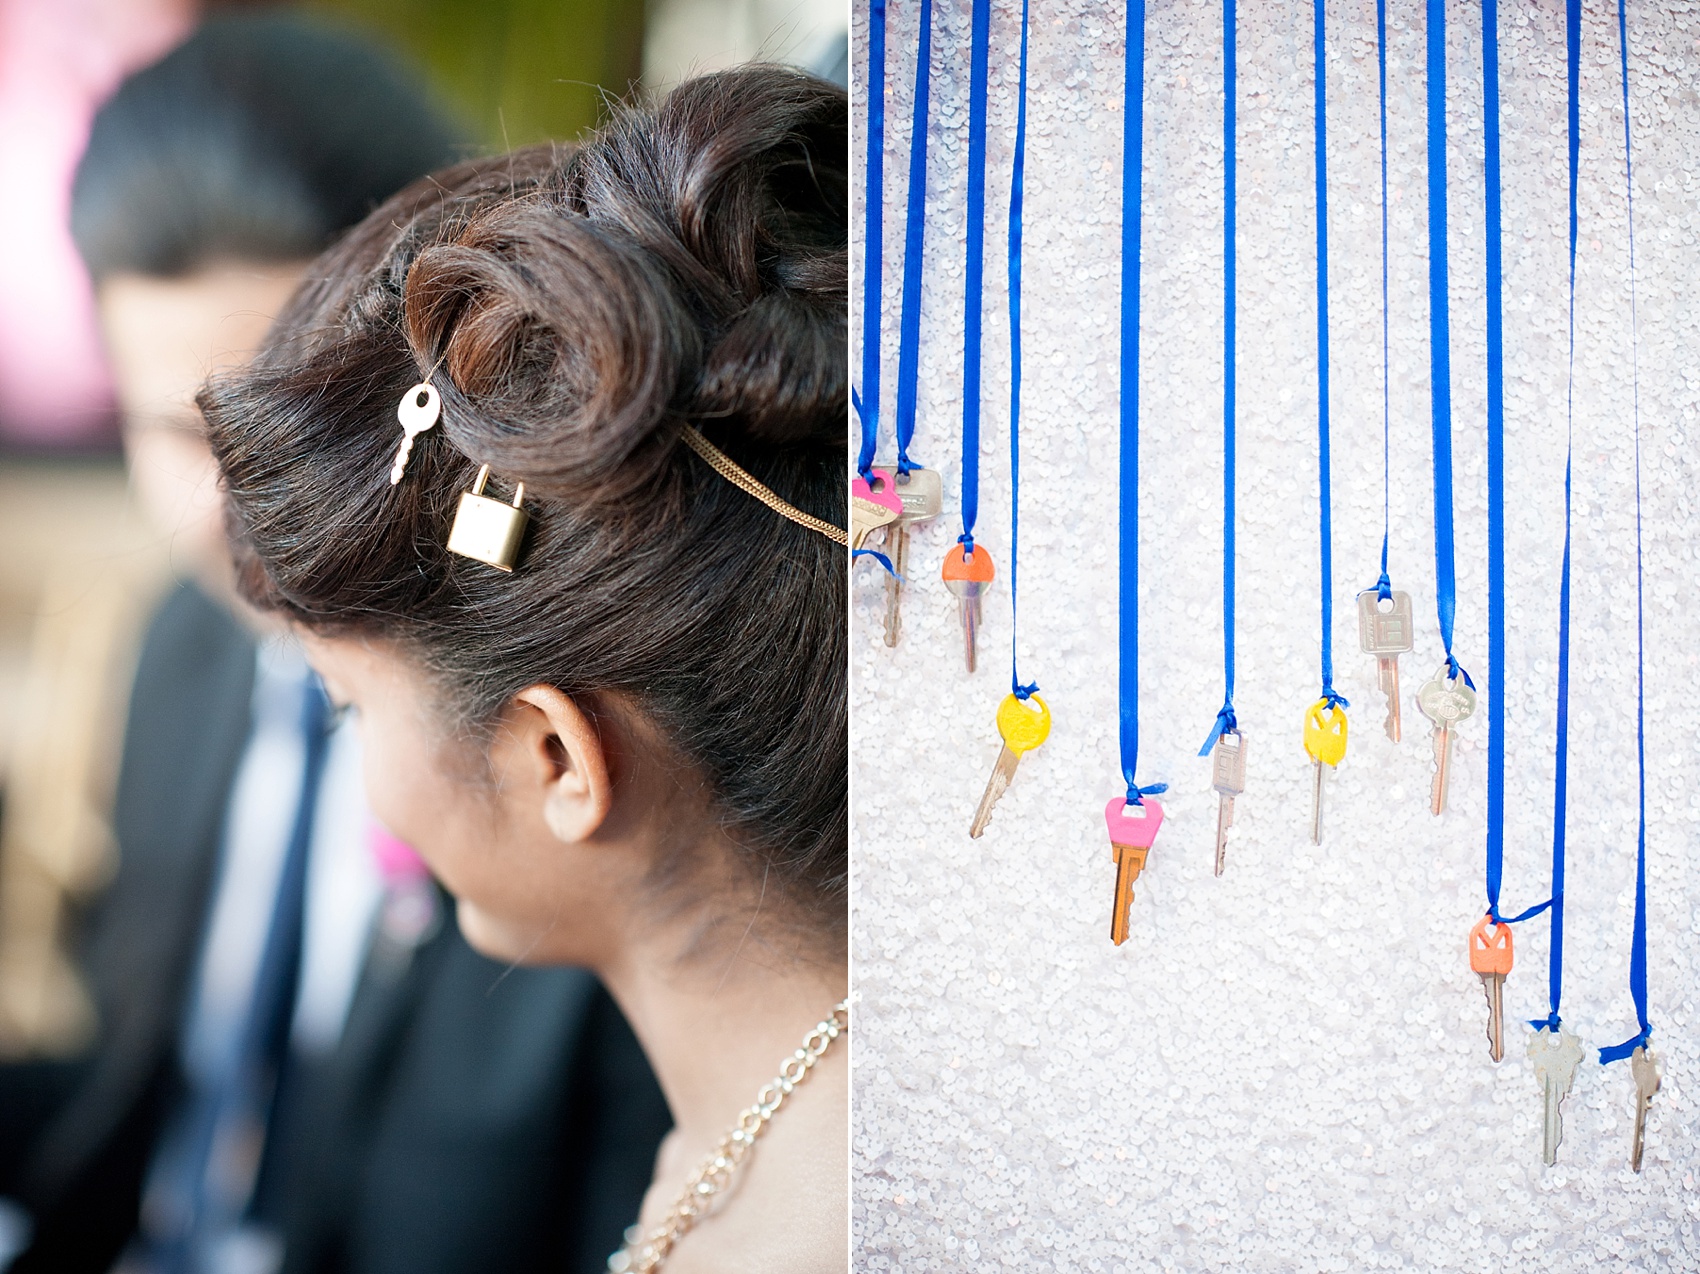 Bobby Pin jewelry and custom keys for a Lock and Key, Forever Linked, Ponts des Art wedding inspiration with custom love lock place cards. Photos by Mikkel Paige Photography, planning by Dulce Dream Events. Hair by Lauren DeCosimo.